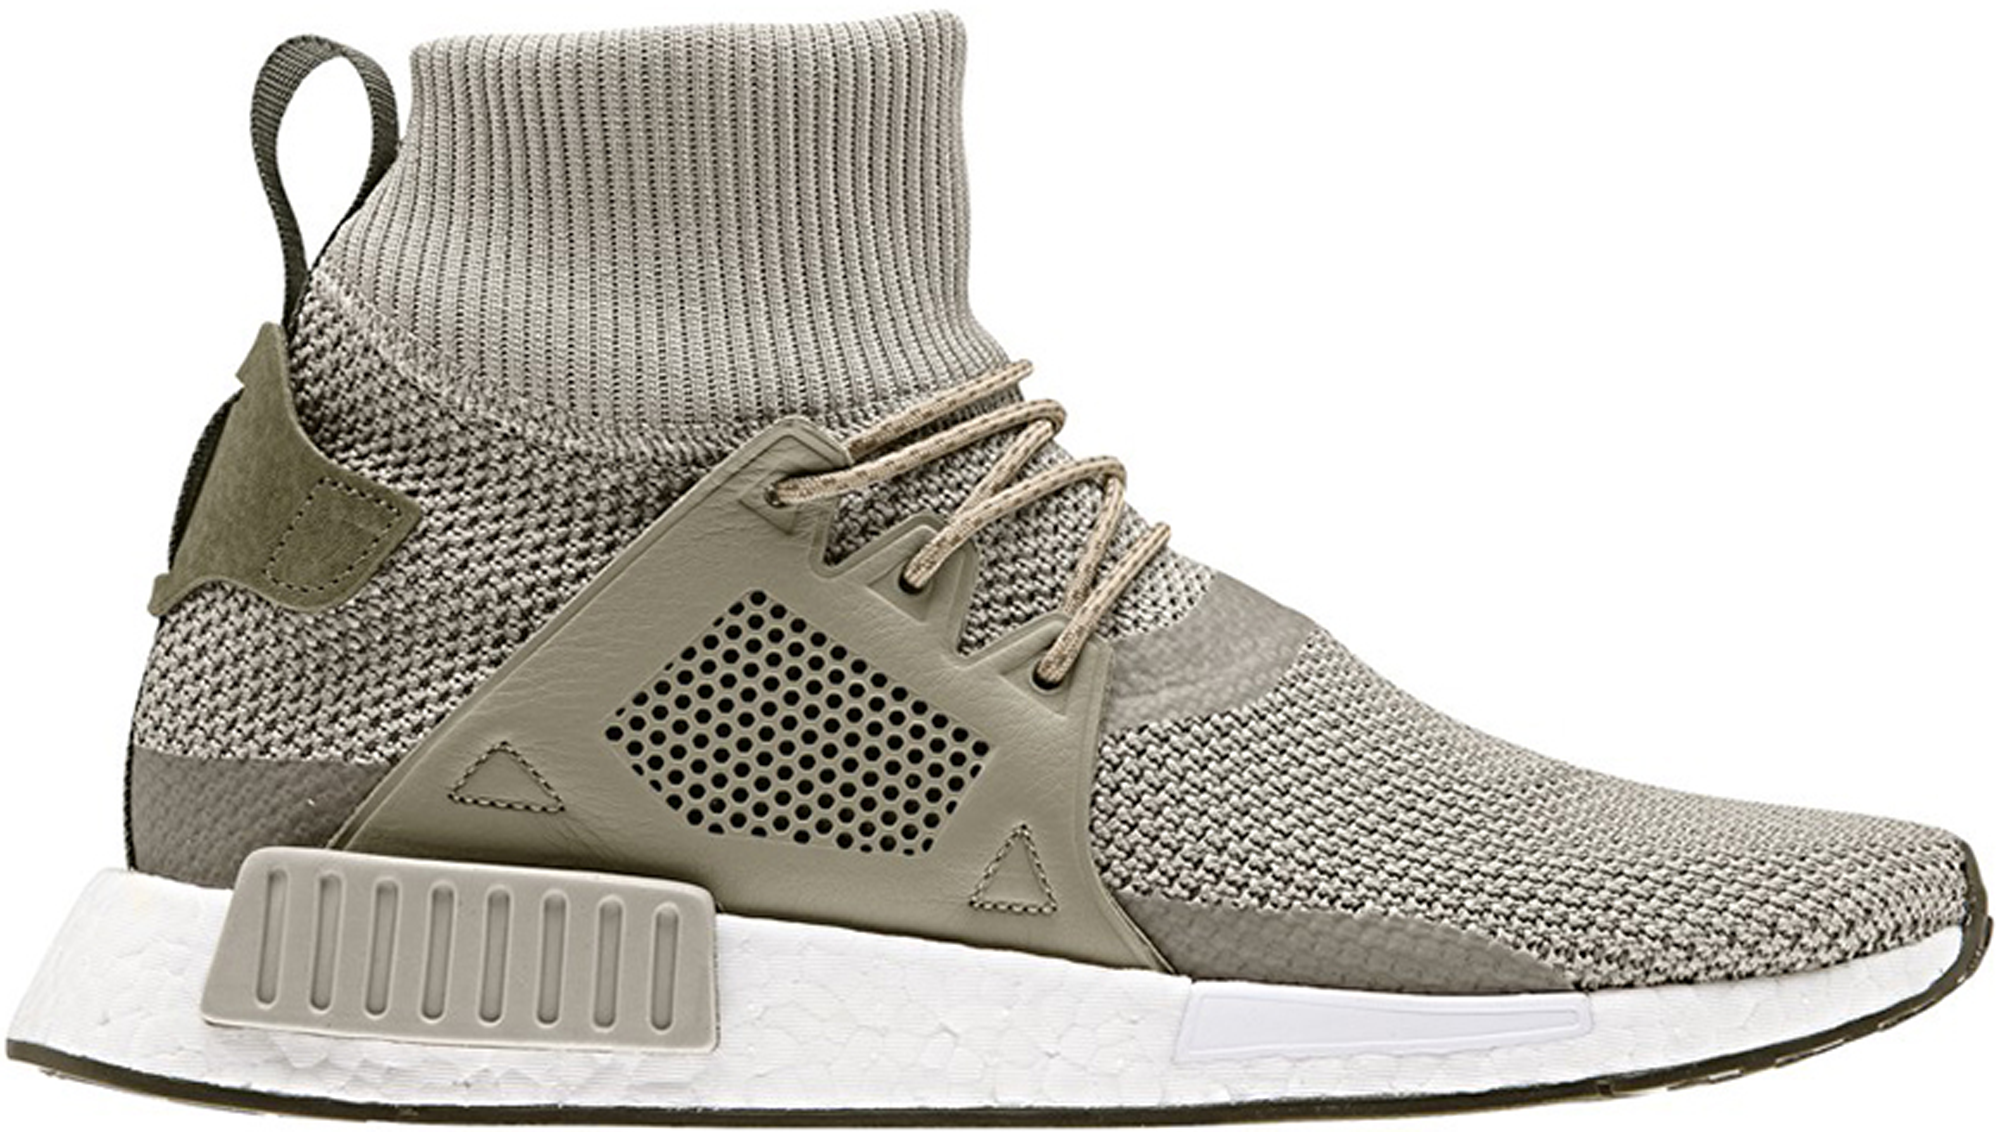 adidas nmd xr1 shoes